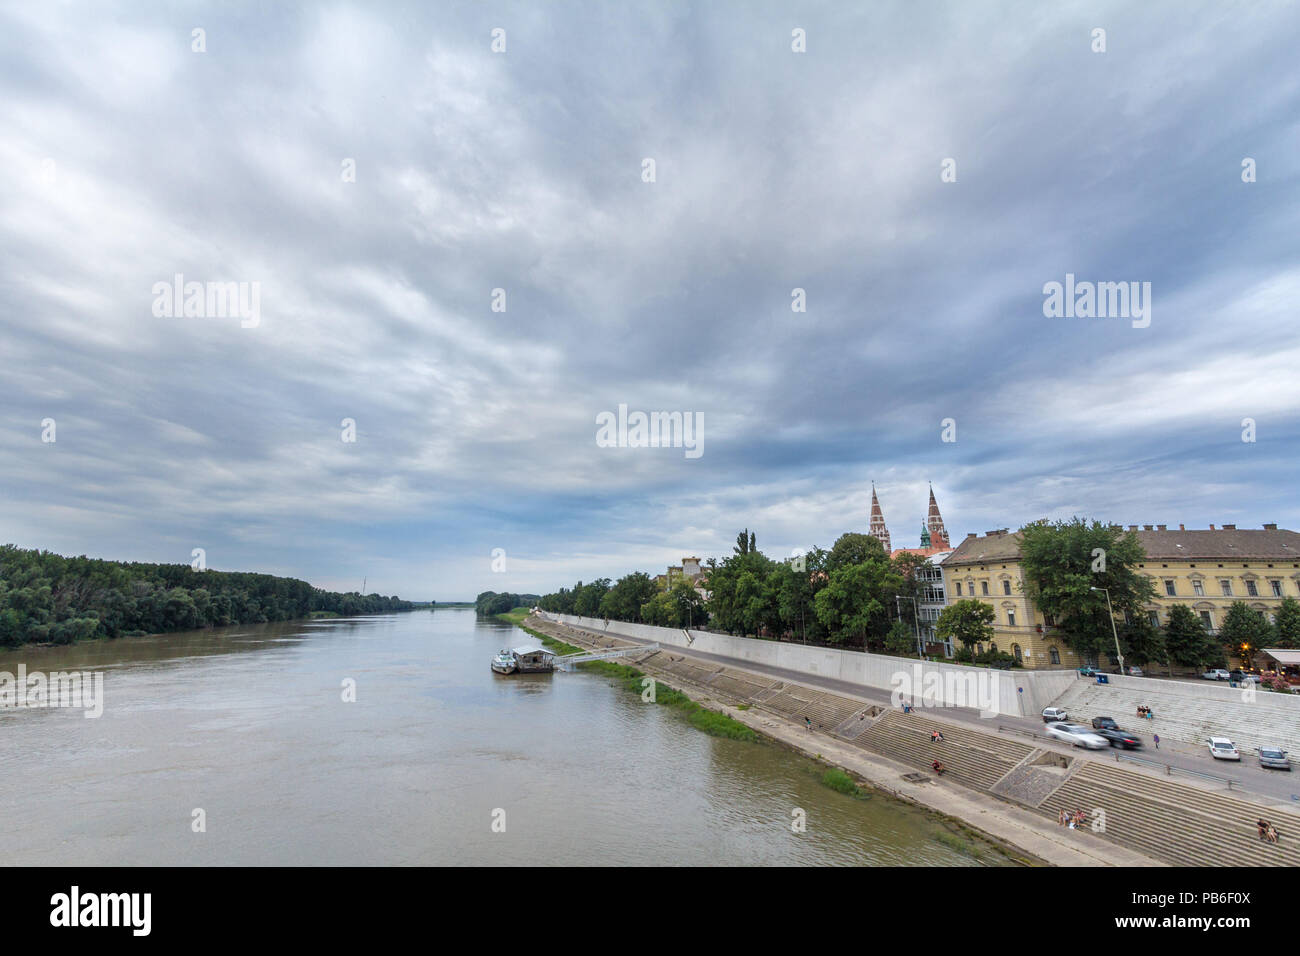 SZEGED, HUNGARY - JULY 4, 2018: Szeged city center seen from Tisza river, with a highlight on Szeged Cathedral, seen into the light during sunset duri Stock Photo